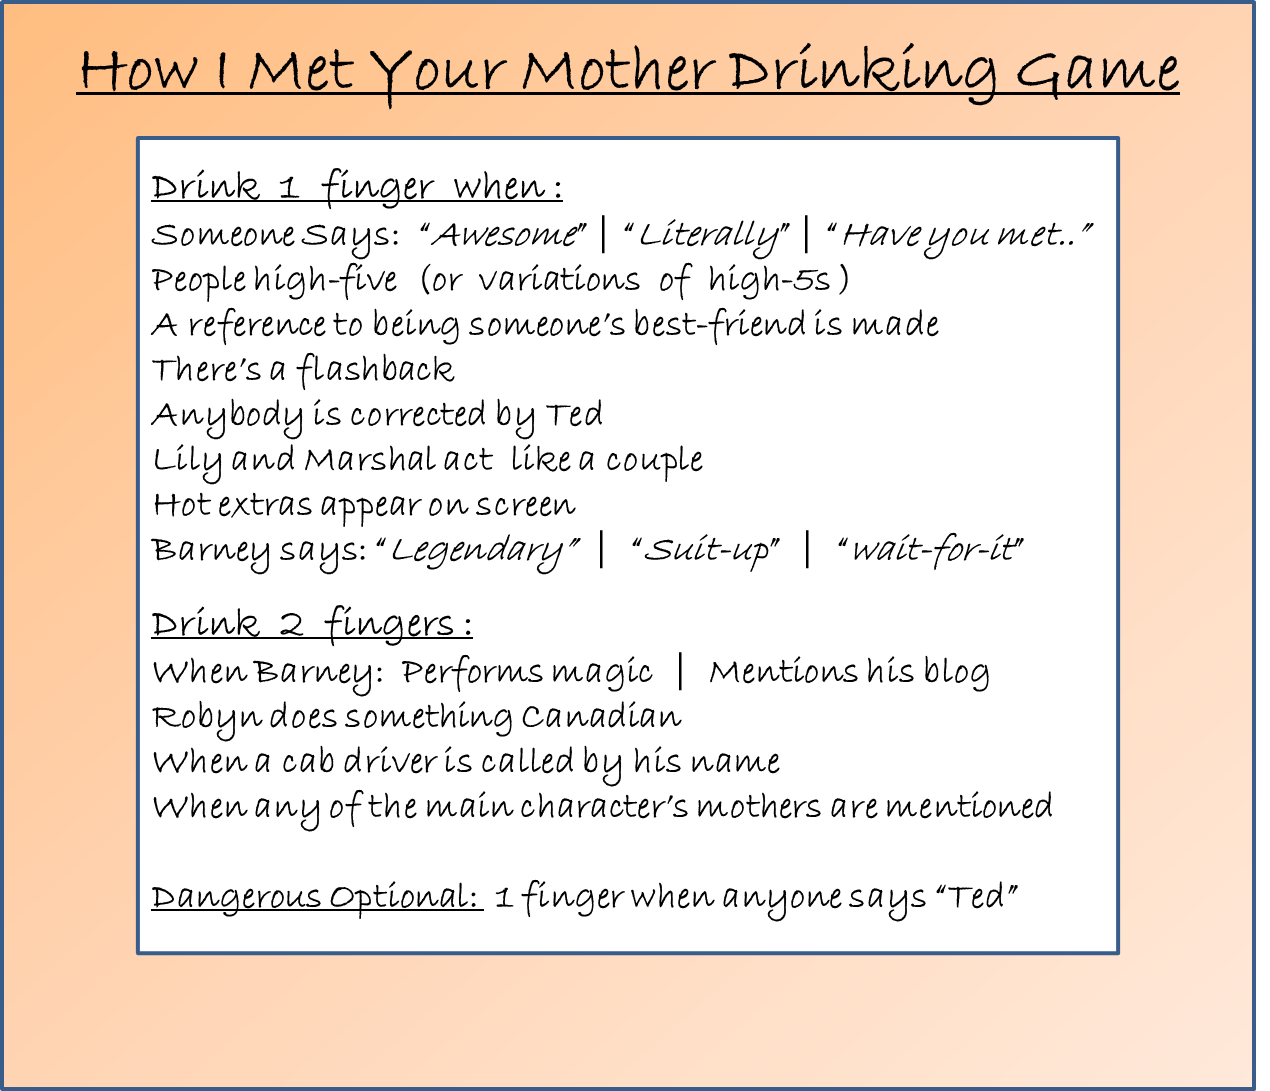 How I Met Your Mother / Drinking Game - TV Tropes